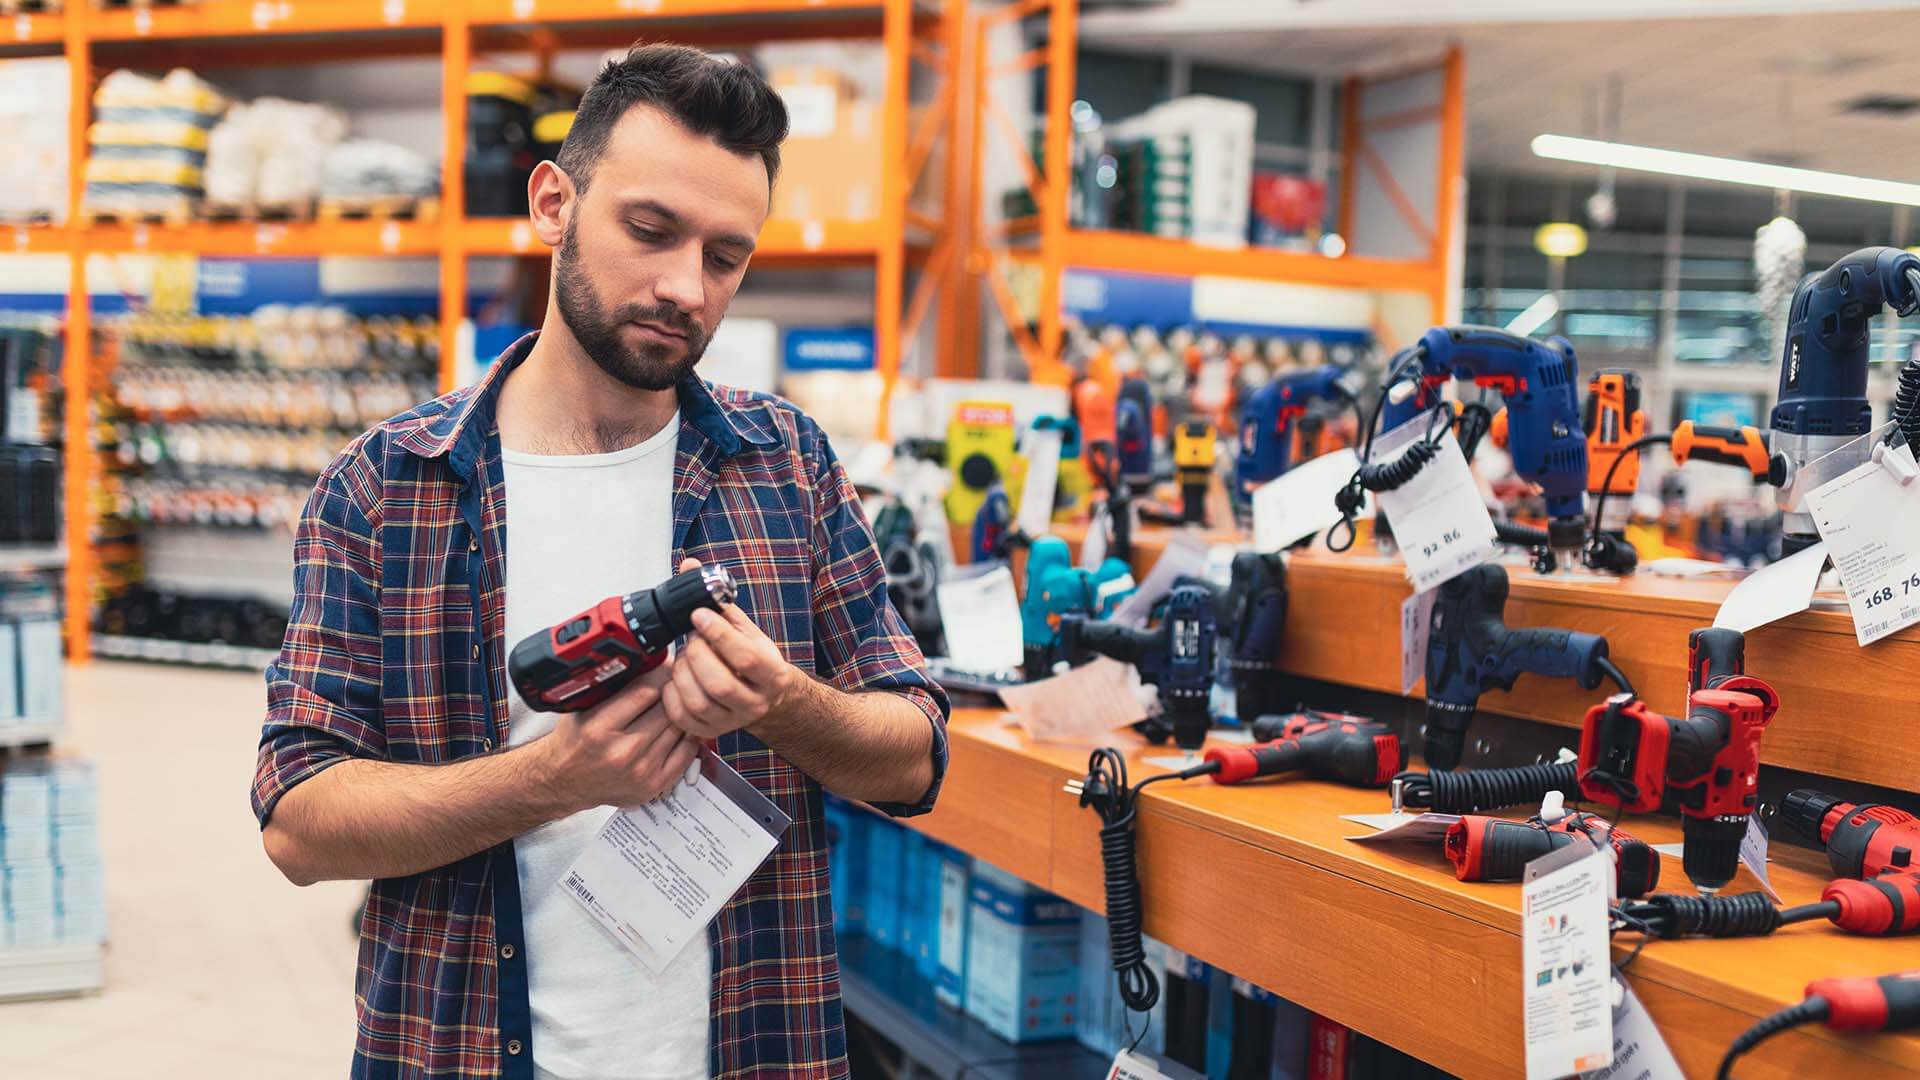 A man examines a power tool or drill at a big box hardware store unaware if it could be a defective product and finds himself in a product liability case